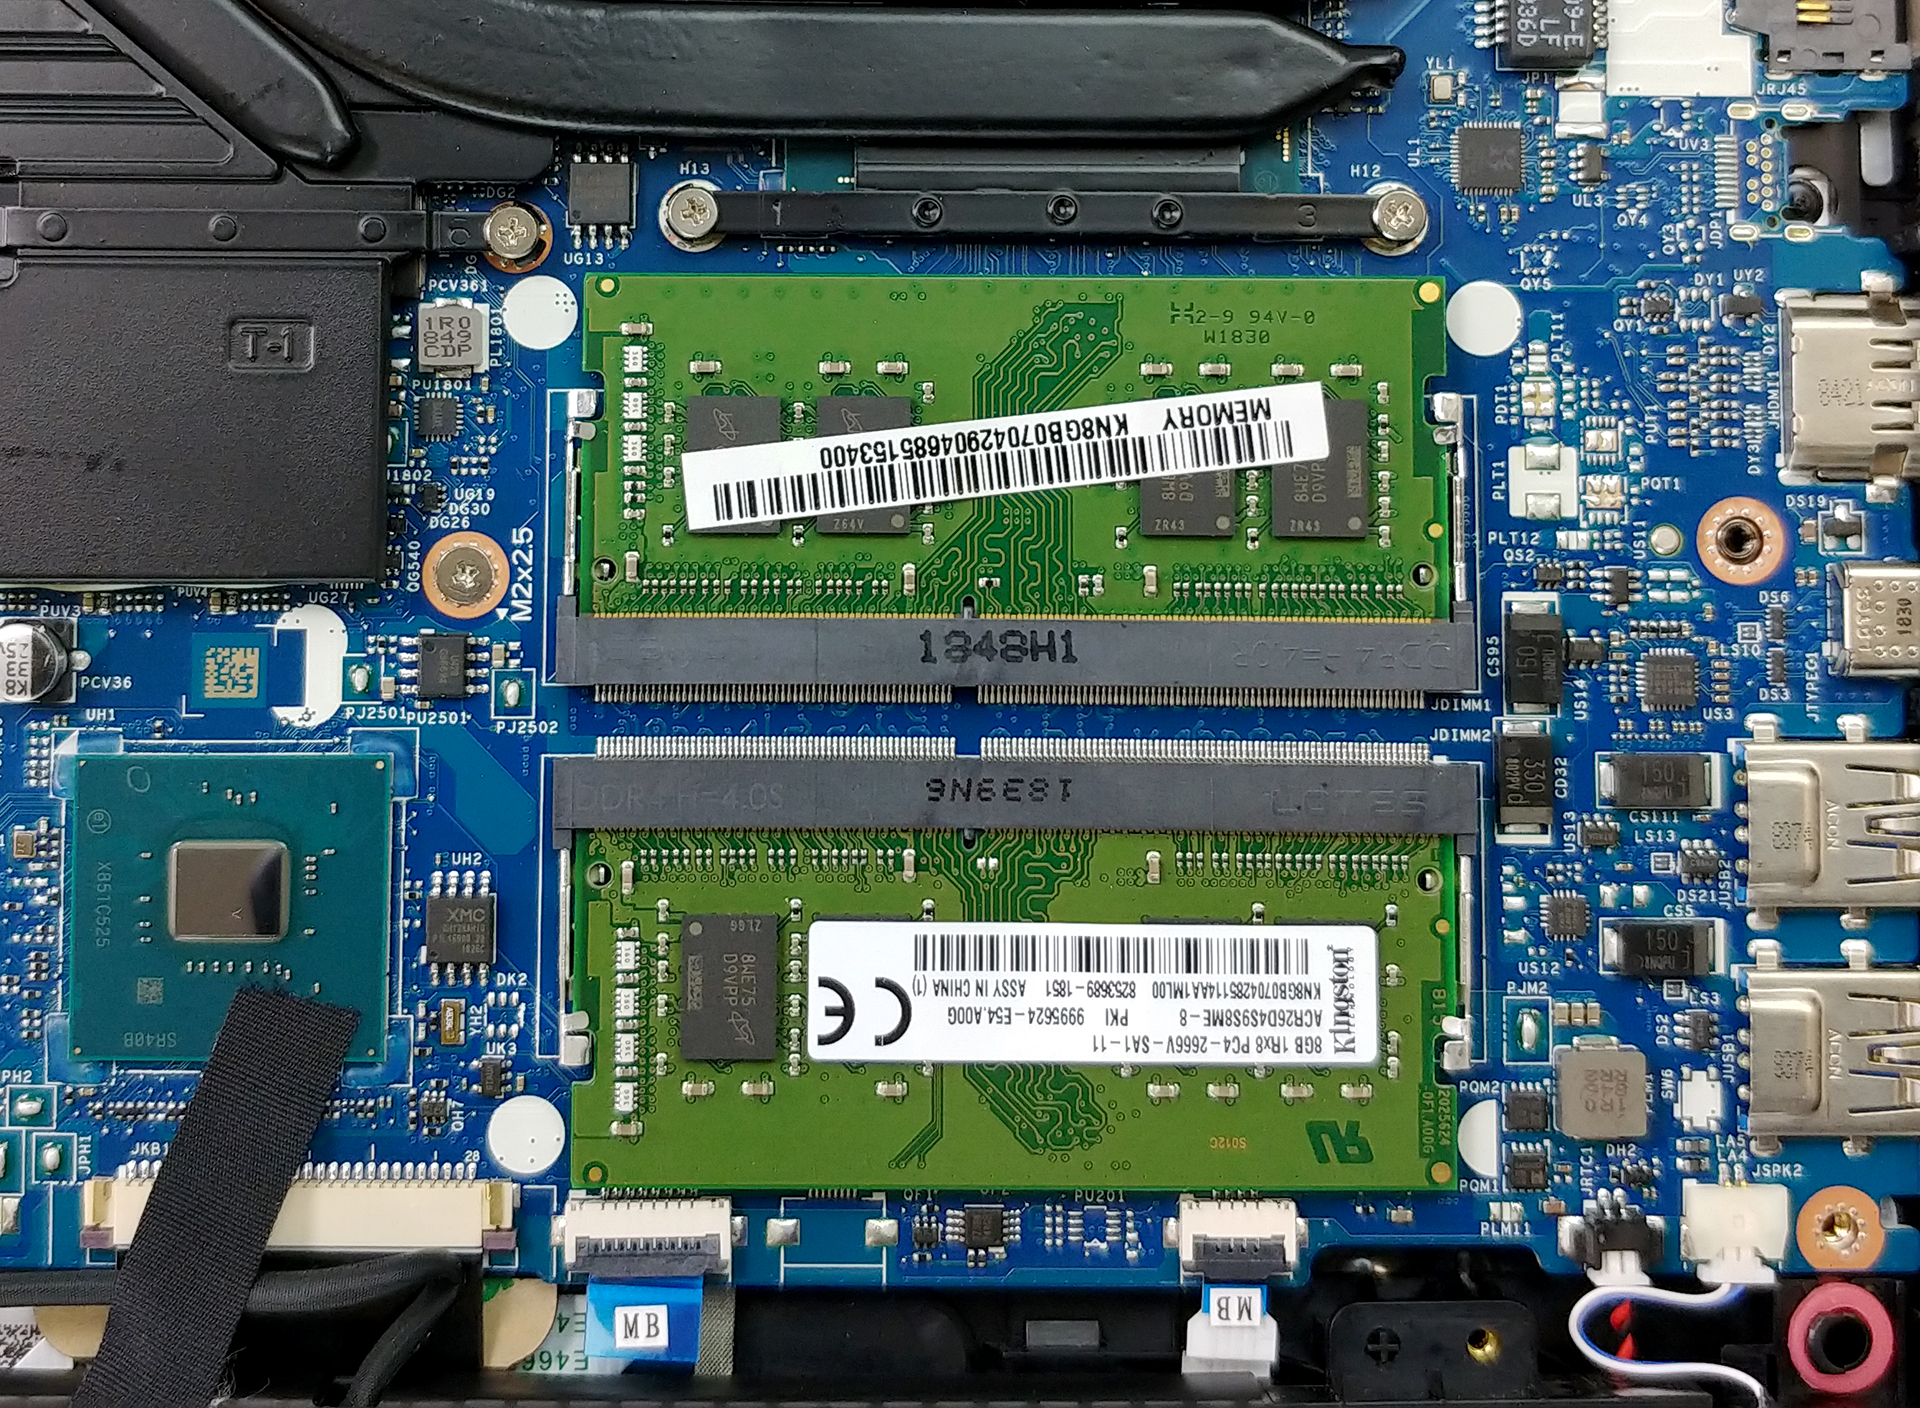 Inside Acer 5 (AN515-54) - disassembly and options | LaptopMedia.com